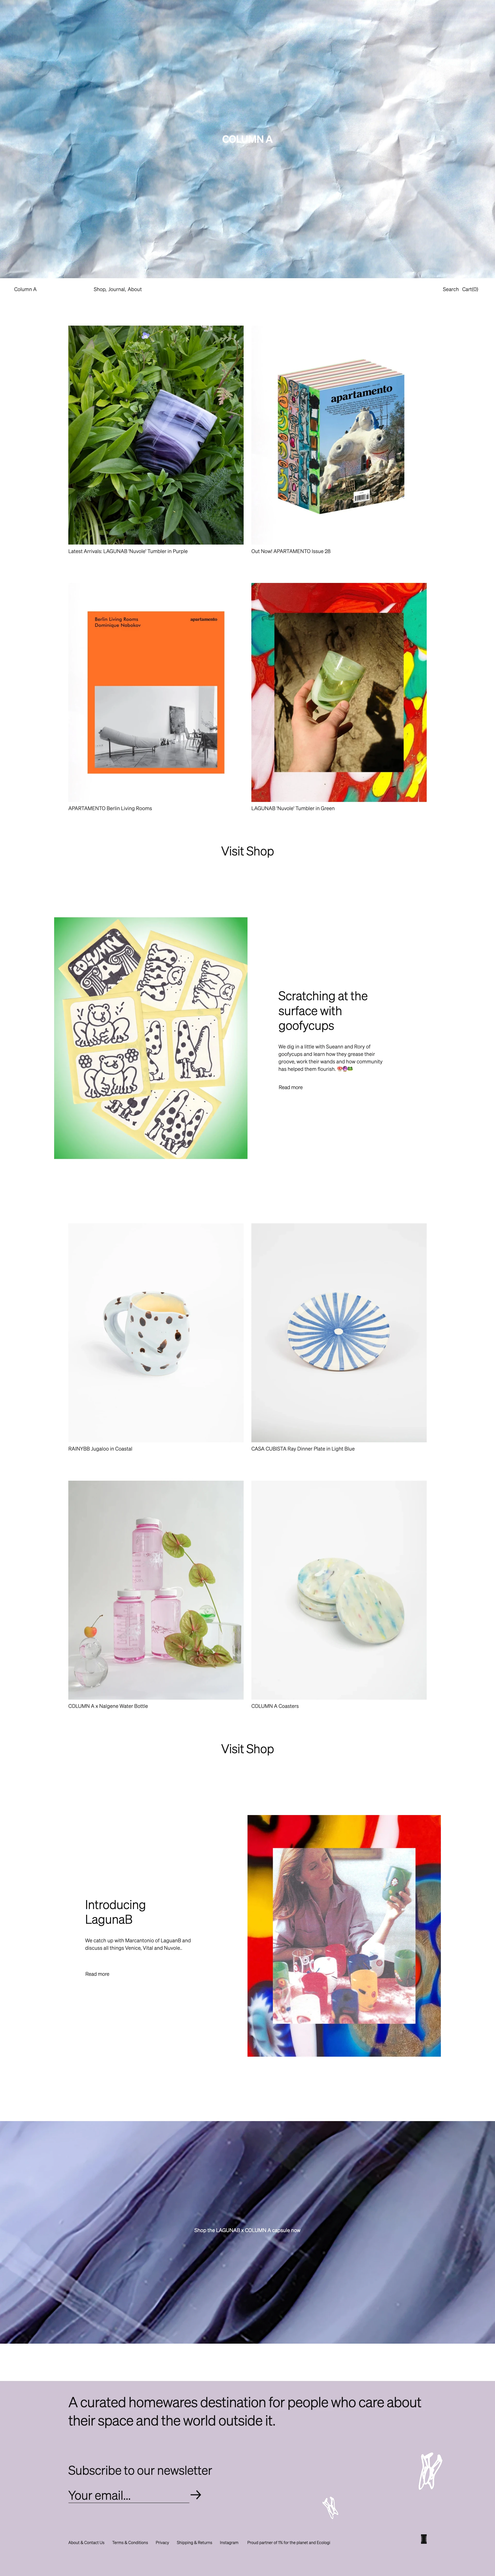 COLUMN A Landing Page Example: A new online homewares destination to elevate everyday living.